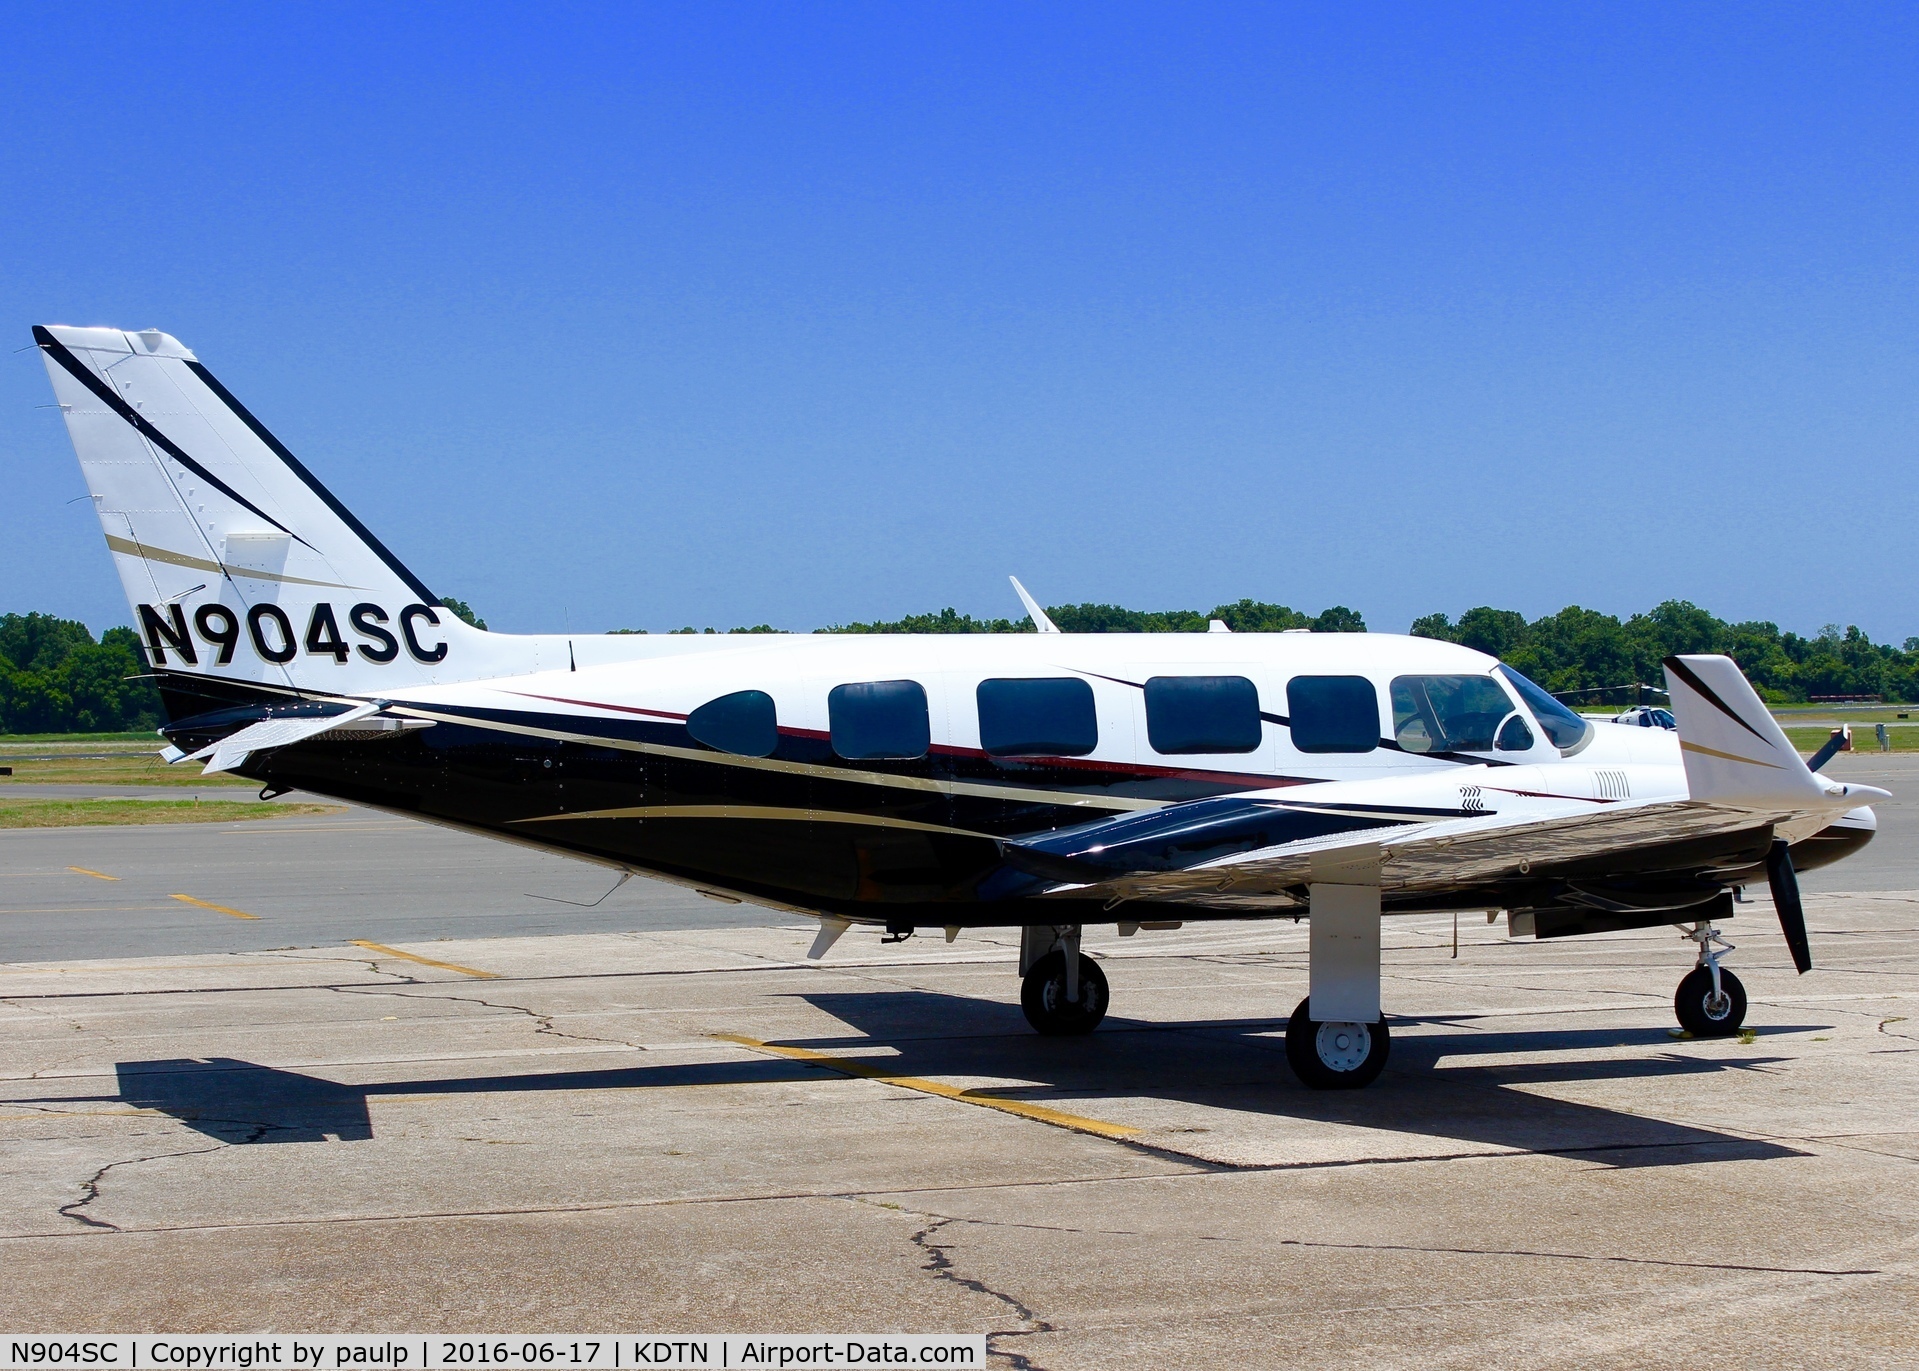 N904SC, 1981 Piper PA-31-350 Chieftain C/N 31-8152194, At Downtown Shreveport.